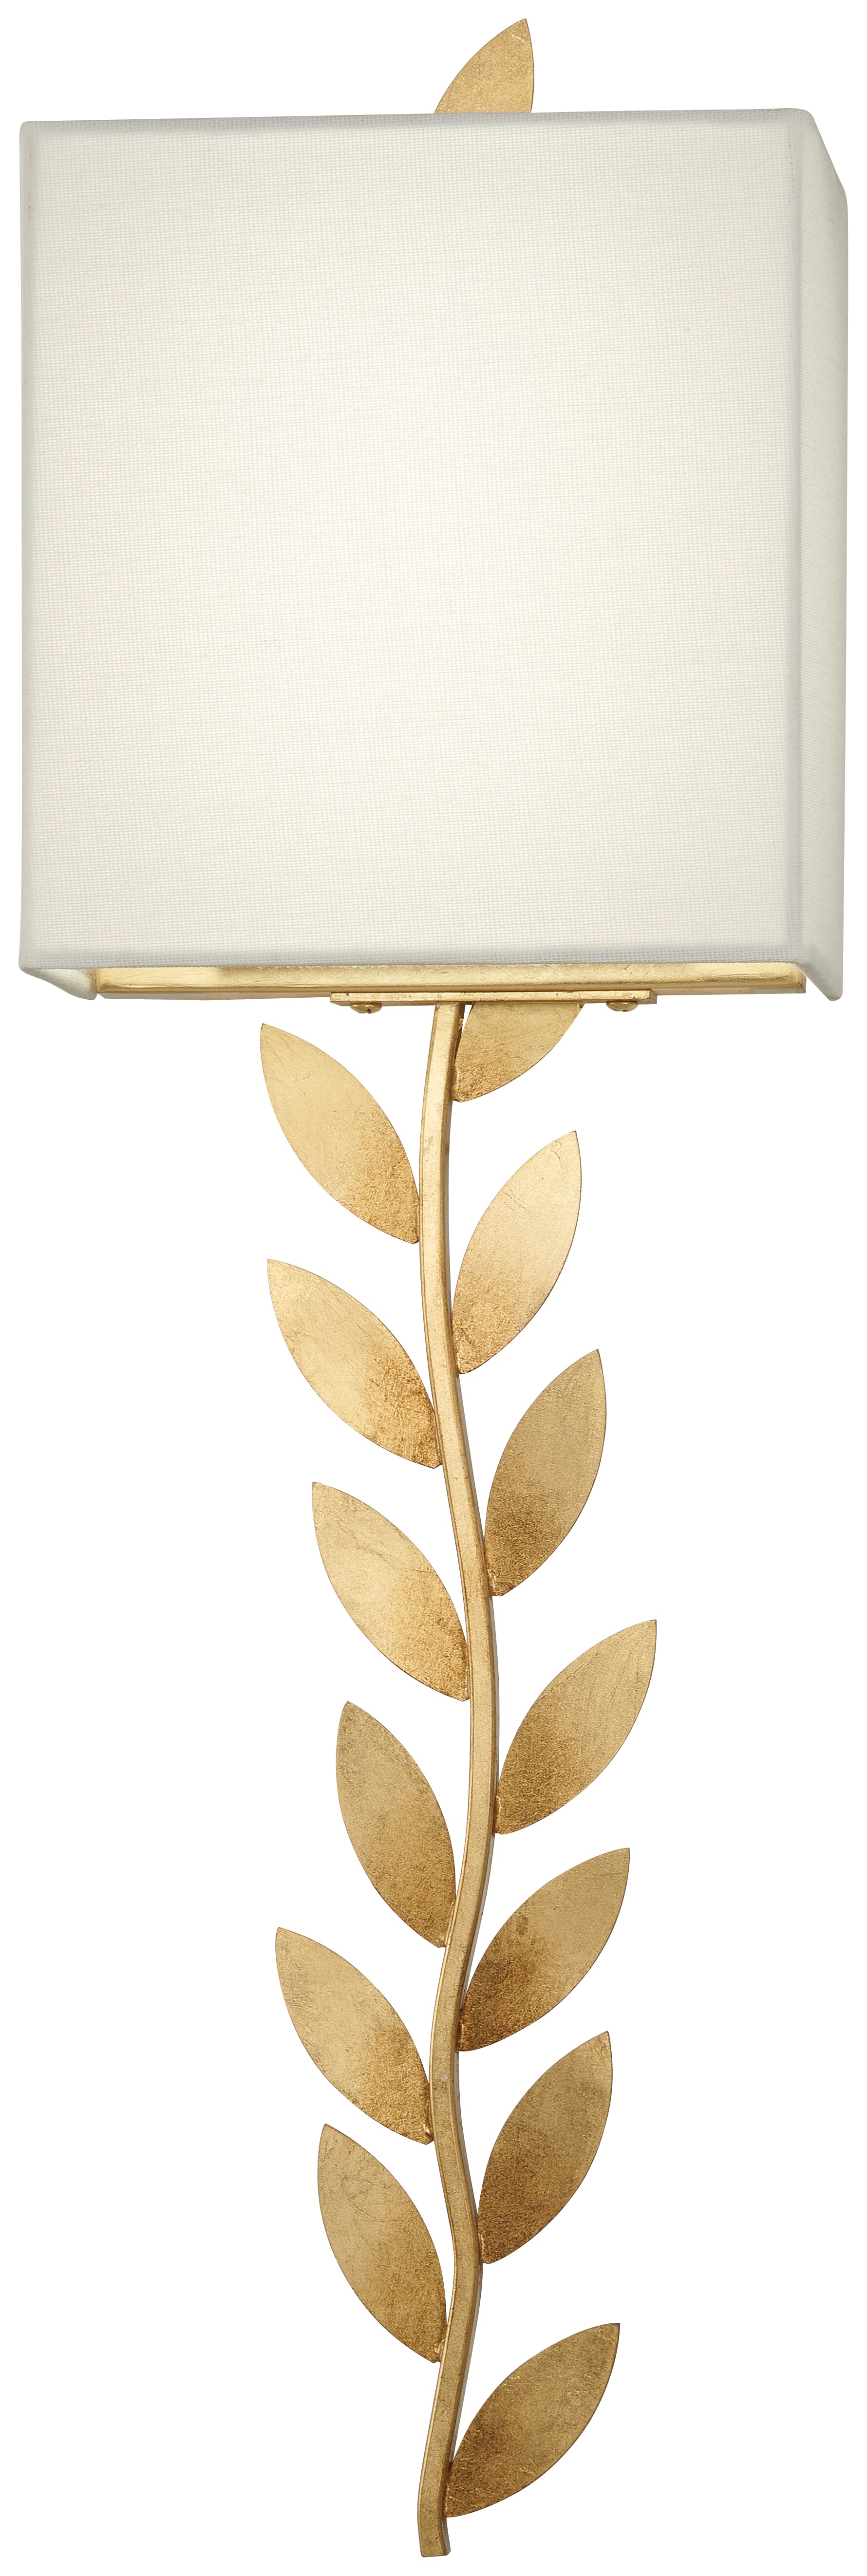 Metropolitan Arbor Grove 2-Light Wall Sconce in Ardent Gold Leaf